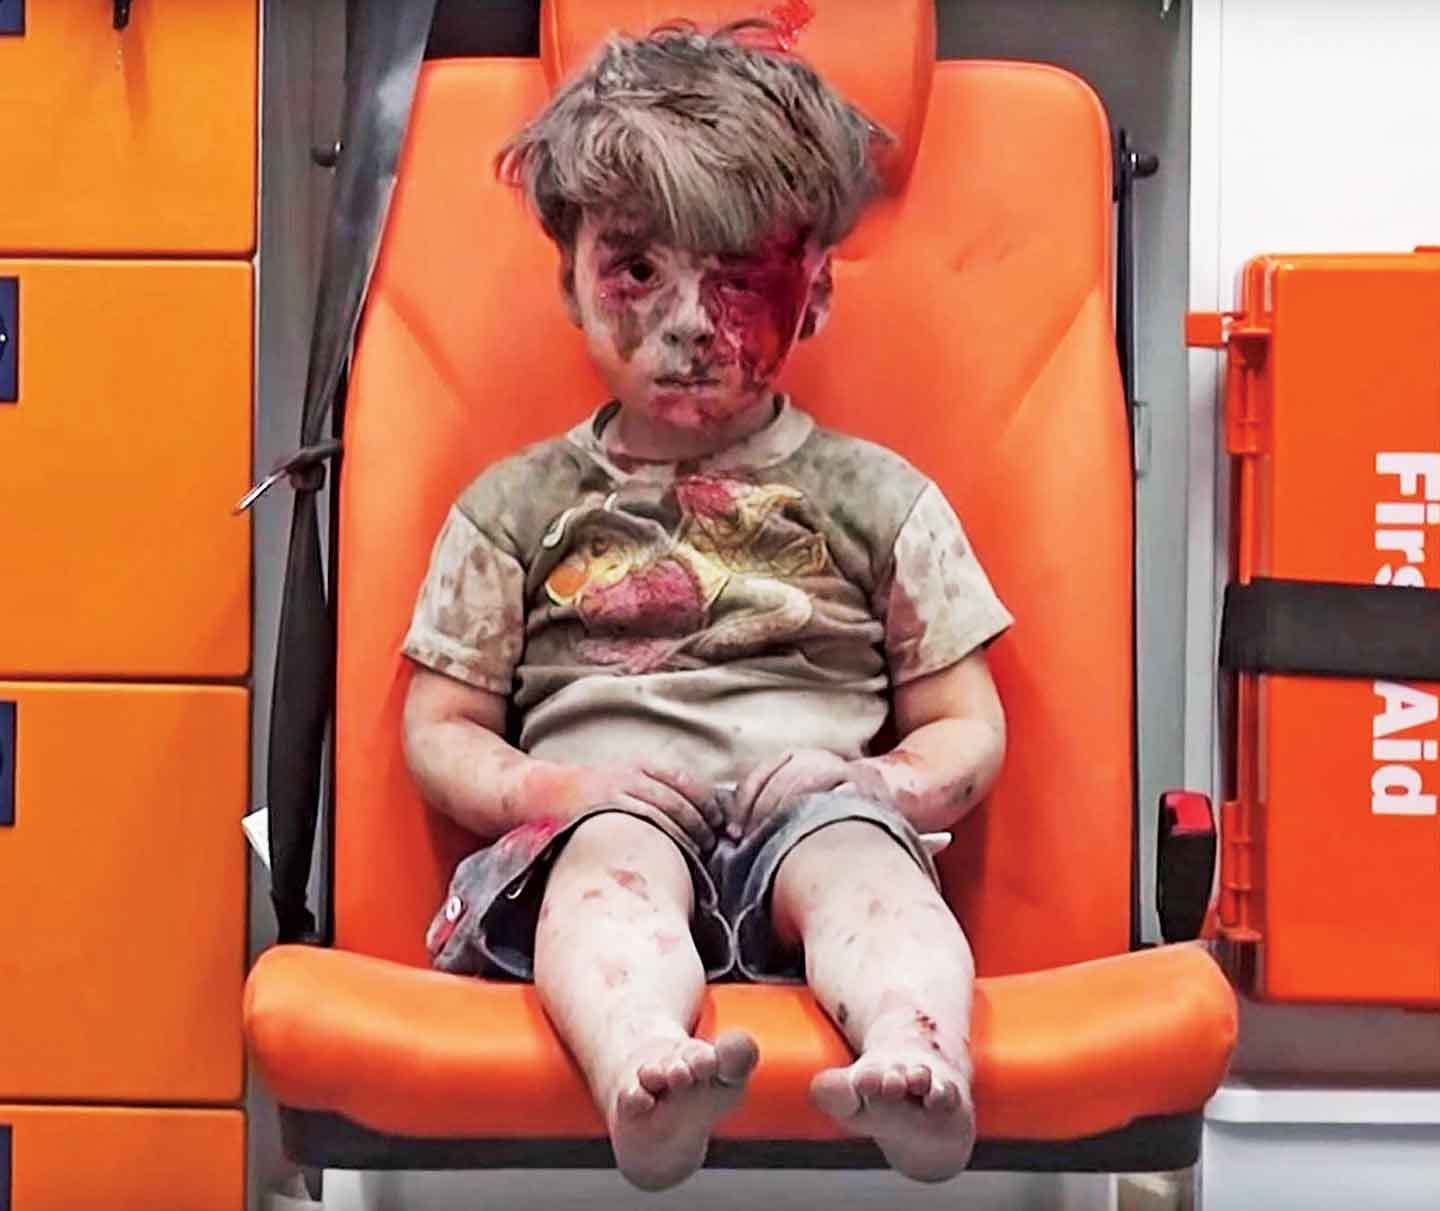 Phil kept a photo of Omran Daqneesh in his home and on his lock screen